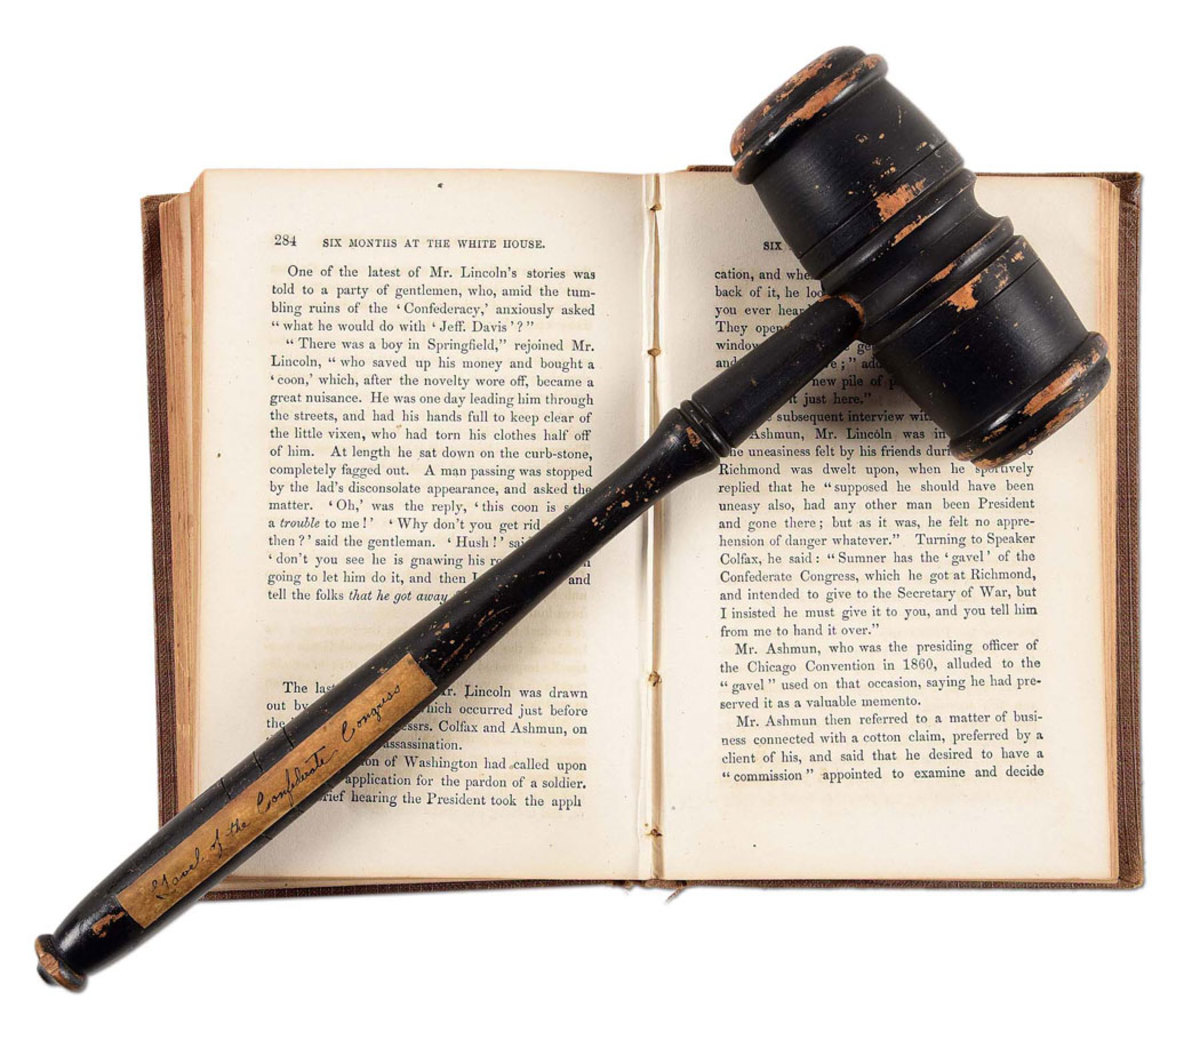 Historic gavel used in the Congress of the Confederate States of America, retrieved from Richmond in April 1865 by Senator Charles Sumner. Before departing for Ford’s Theatre on the night of his assassination, Abraham Lincoln mentioned the gavel and how it was acquired to White House visitors, Speaker of the House Schuyler Colfax and Massachusetts Congressman George Ashmun.